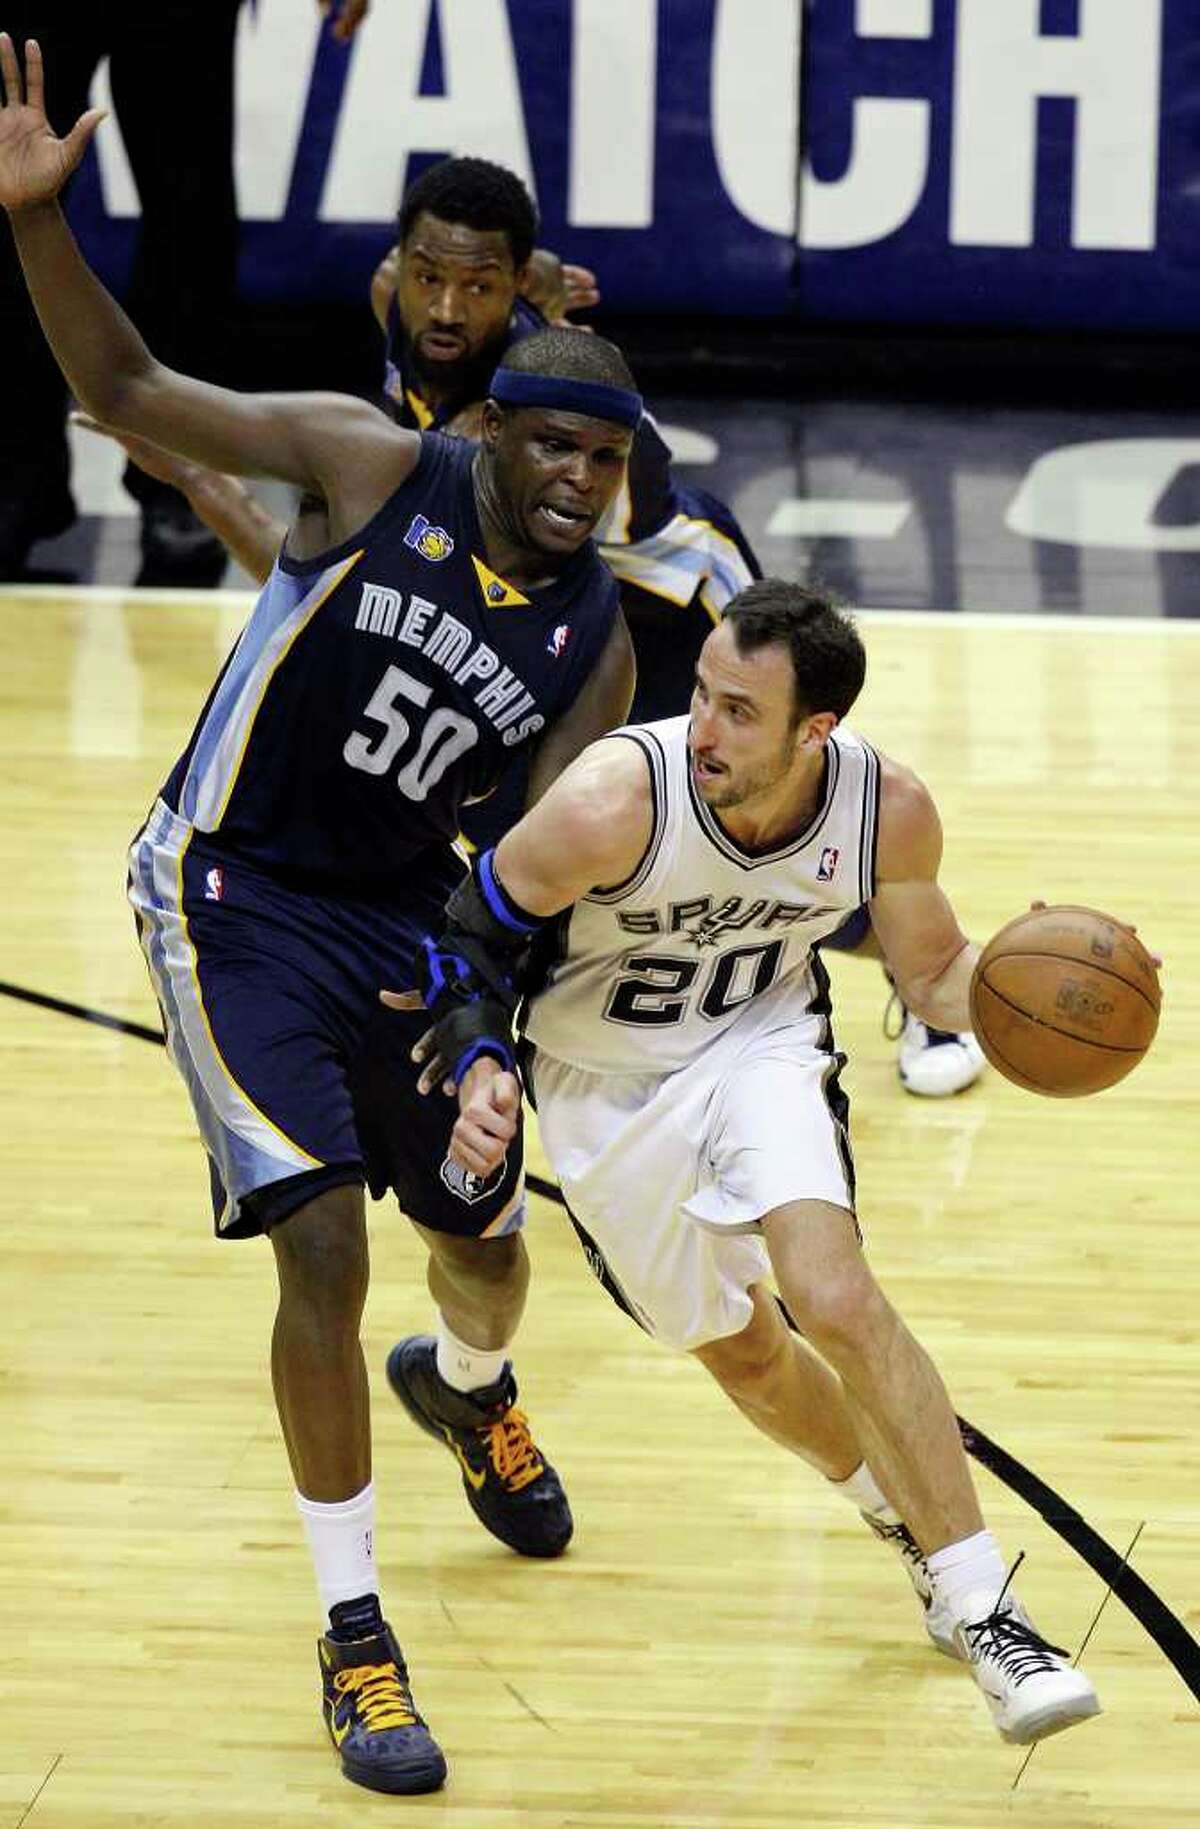 FOR SPORTS - San Antonio Spurs' Manu Ginobili looks for room around Memphis Grizzlies' Zach Randolph during second half action of Game 2 of the first round of the Western Conference playoffs at the AT&T Center Wednesday April 20, 2011. The Spurs won 93-87.(PHOTO BY EDWARD A. ORNELAS/eaornelas@express-news.net)